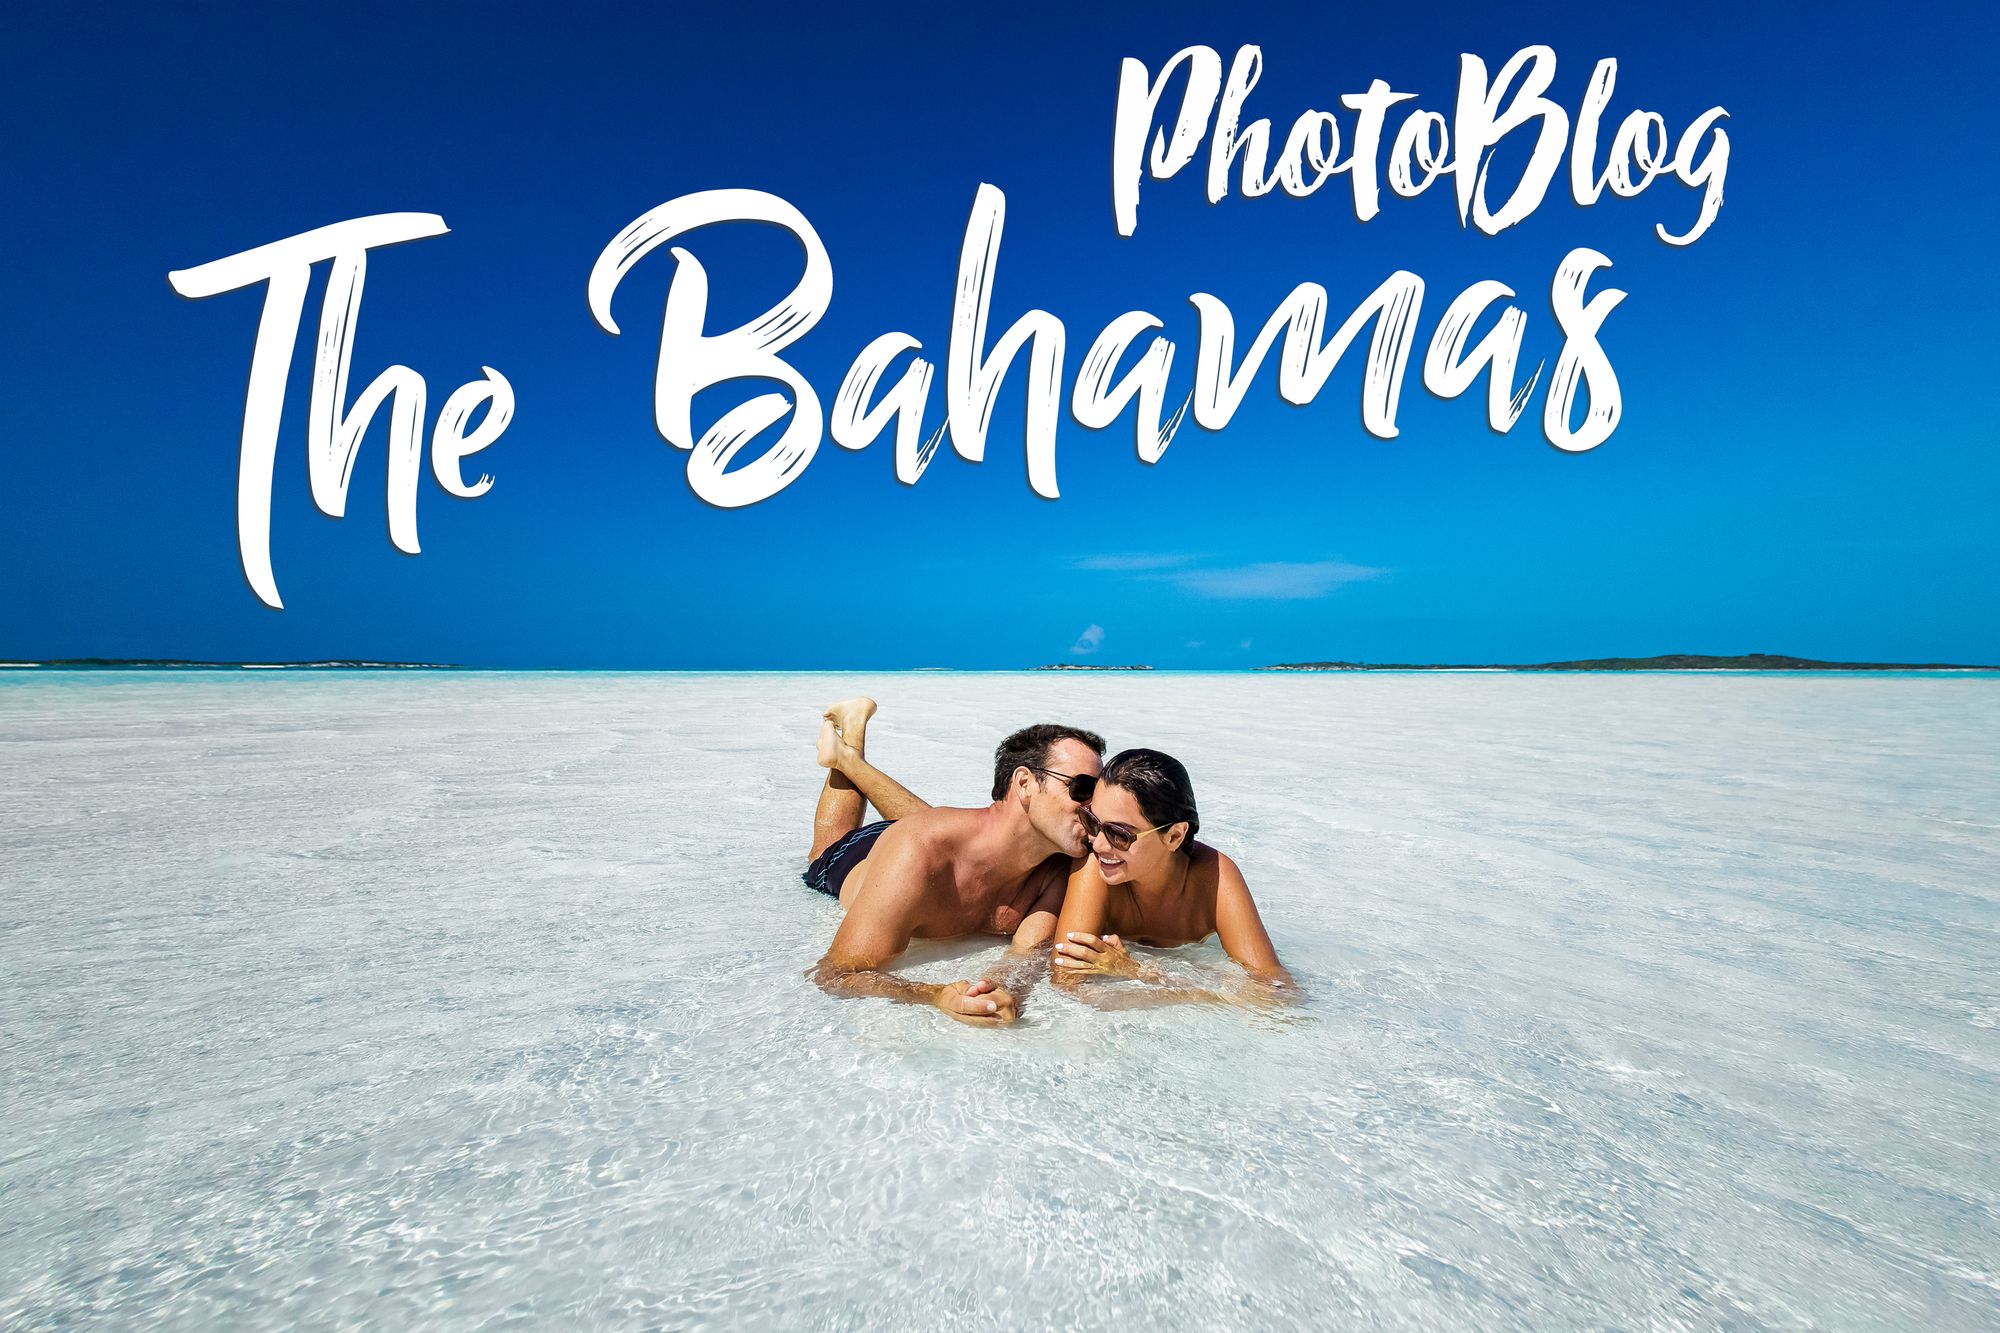 33 Pictures That Will Make You Fall In Love With The Bahamas